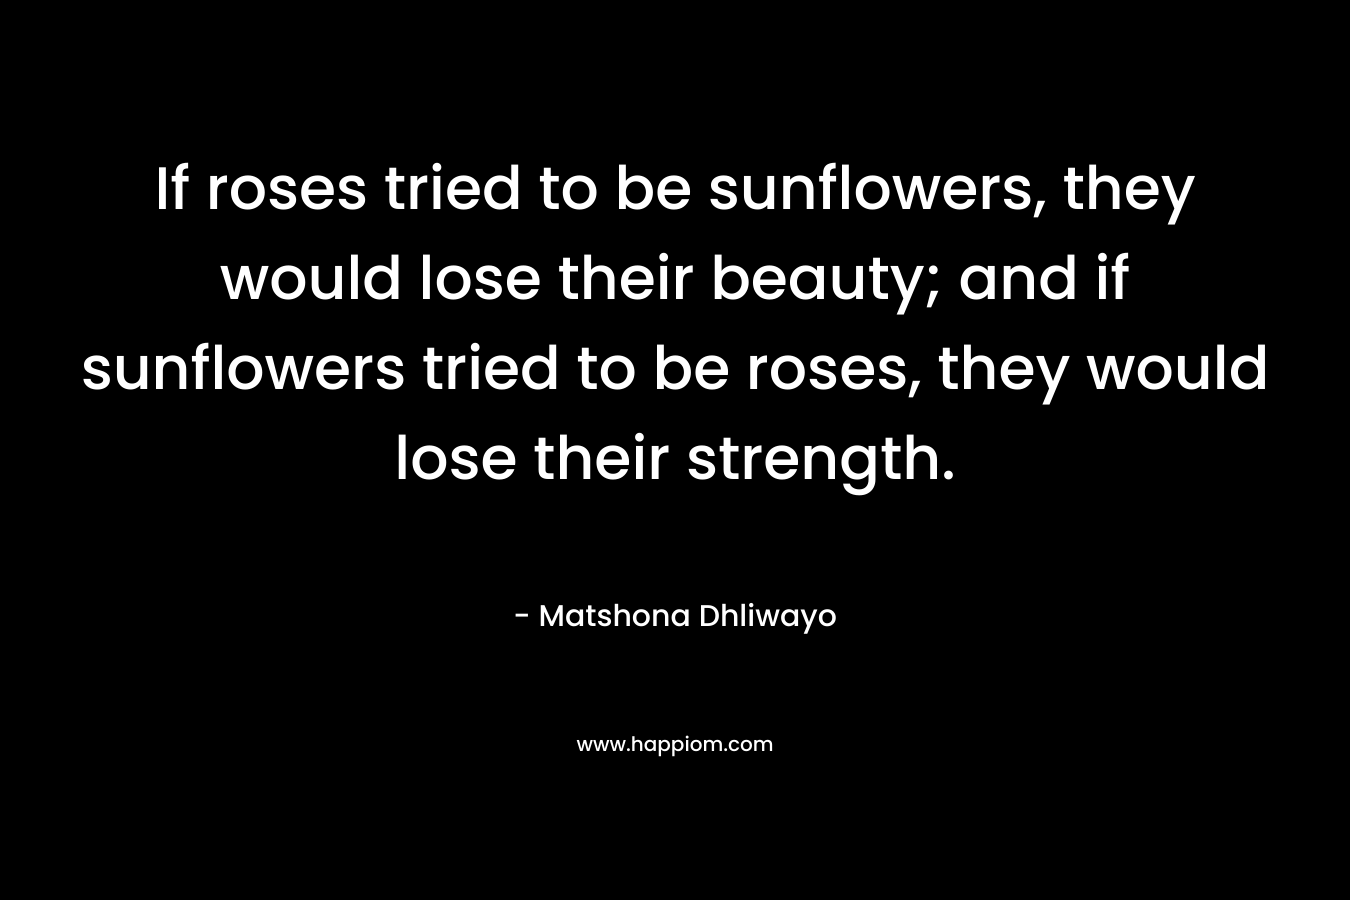 If roses tried to be sunflowers, they would lose their beauty; and if sunflowers tried to be roses, they would lose their strength. – Matshona Dhliwayo